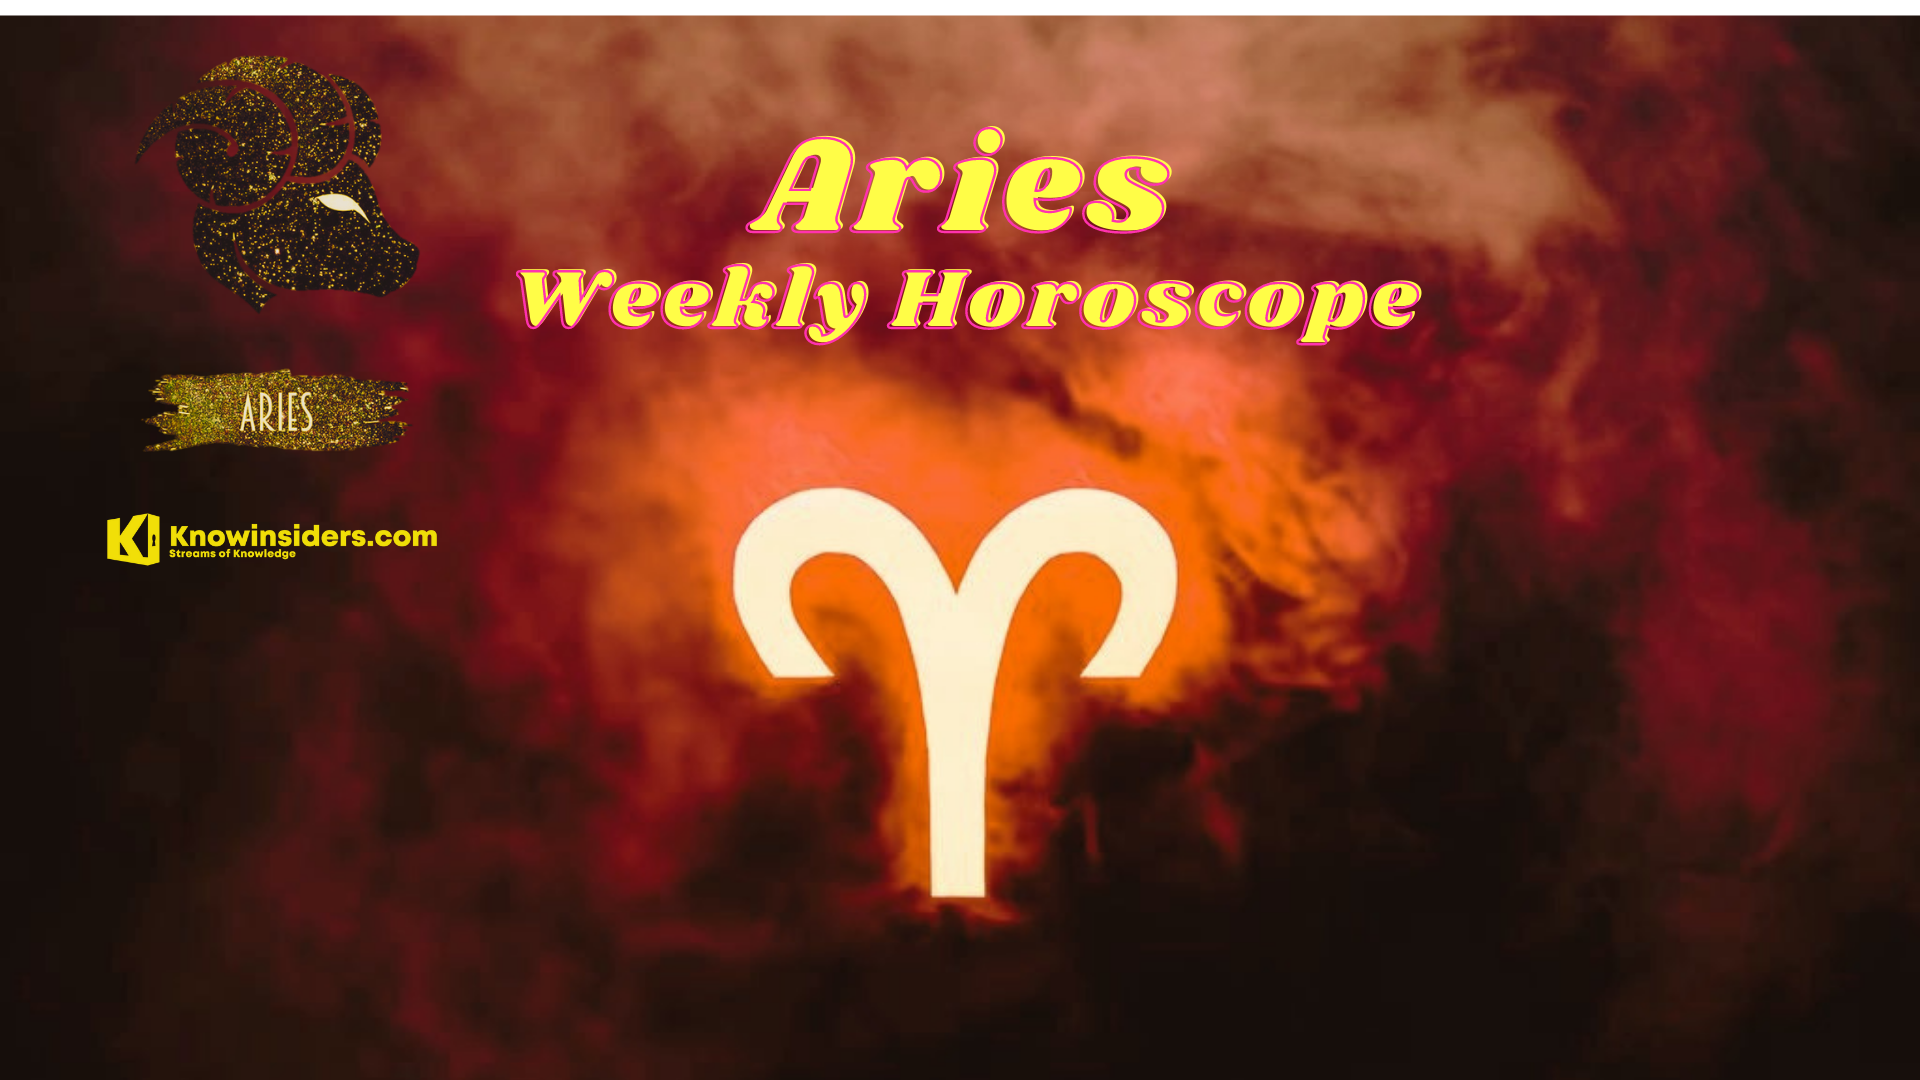 Aries Weekly Horoscope 26 July - 1 August: Predictions for Love, Financial, Health and Career